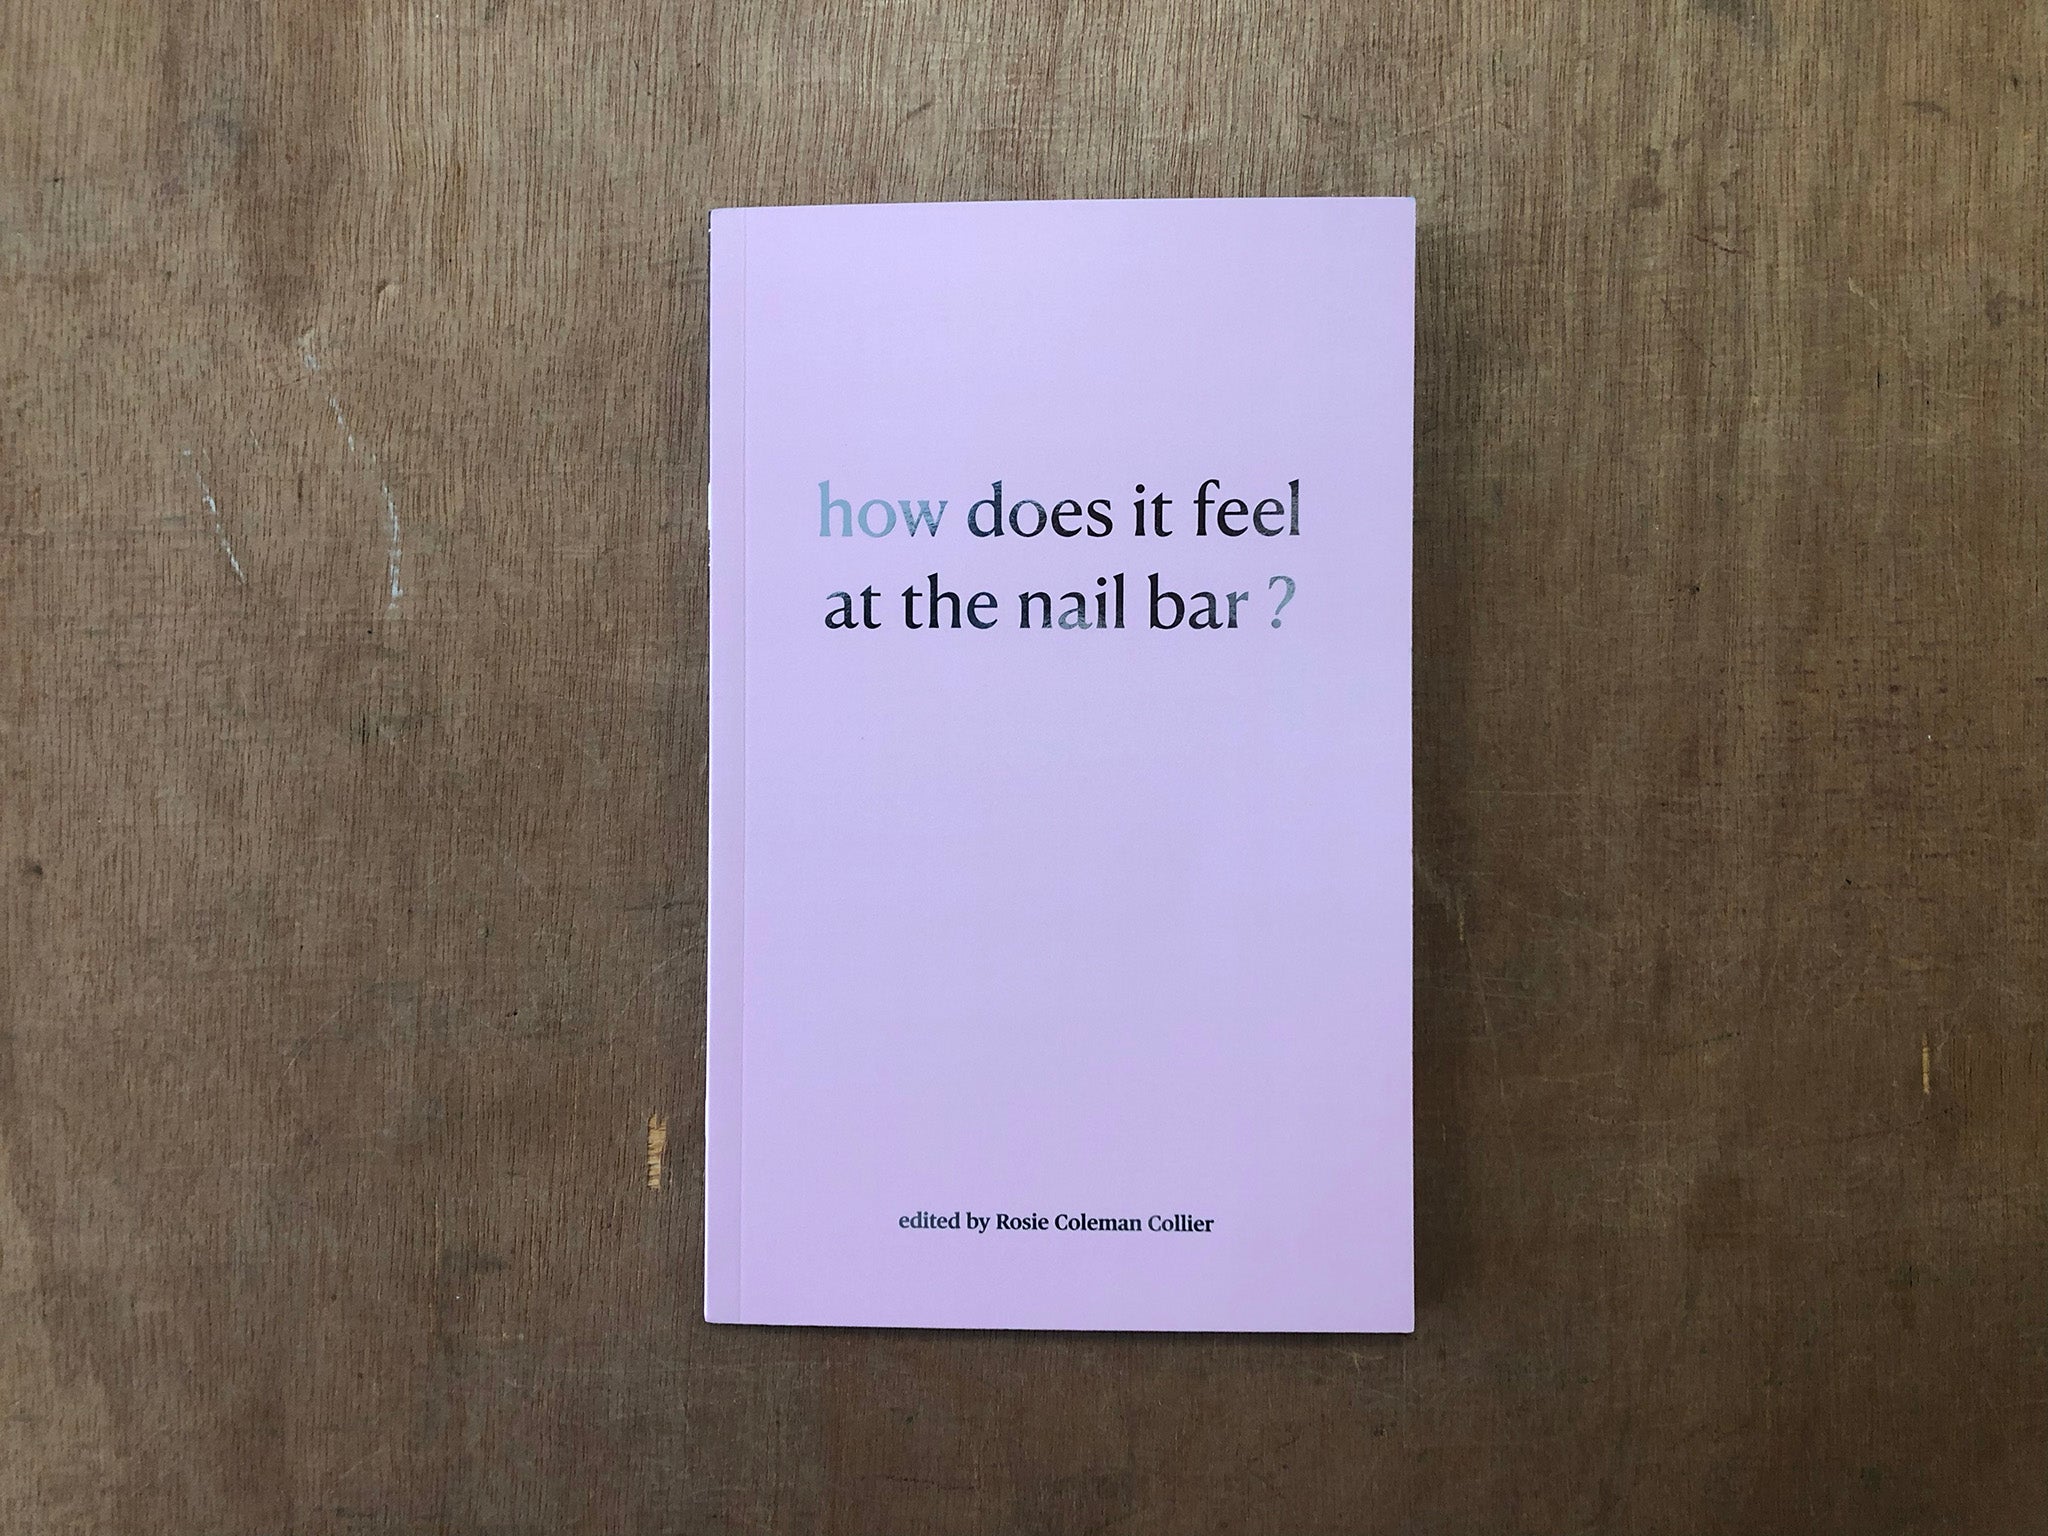 HOW DOES IT FEEL AT THE NAIL BAR? by Rosie Coleman Collier [Ed.], Emma Aars, Kitty Grady and Becki Menzies